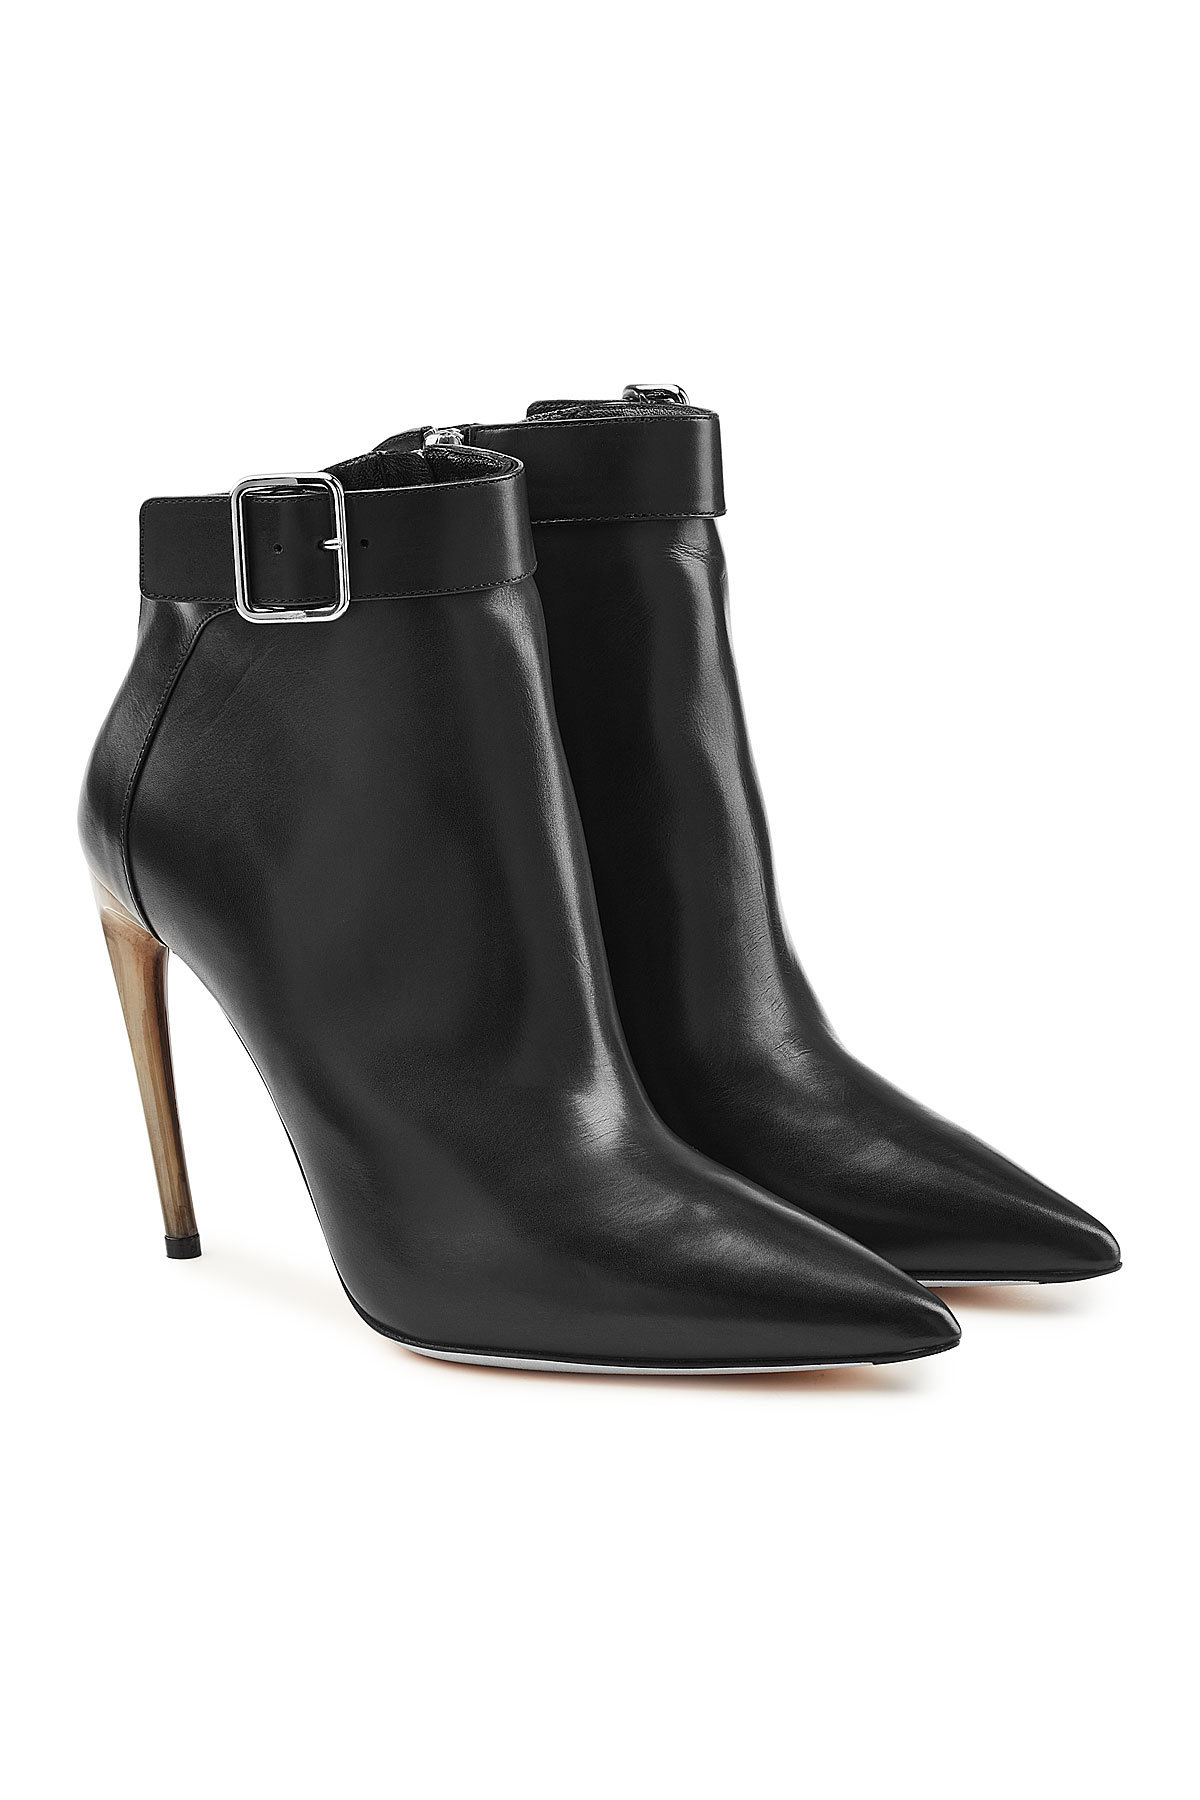 Leather Ankle Boots with Sheepskin Trim by Alexander McQueen